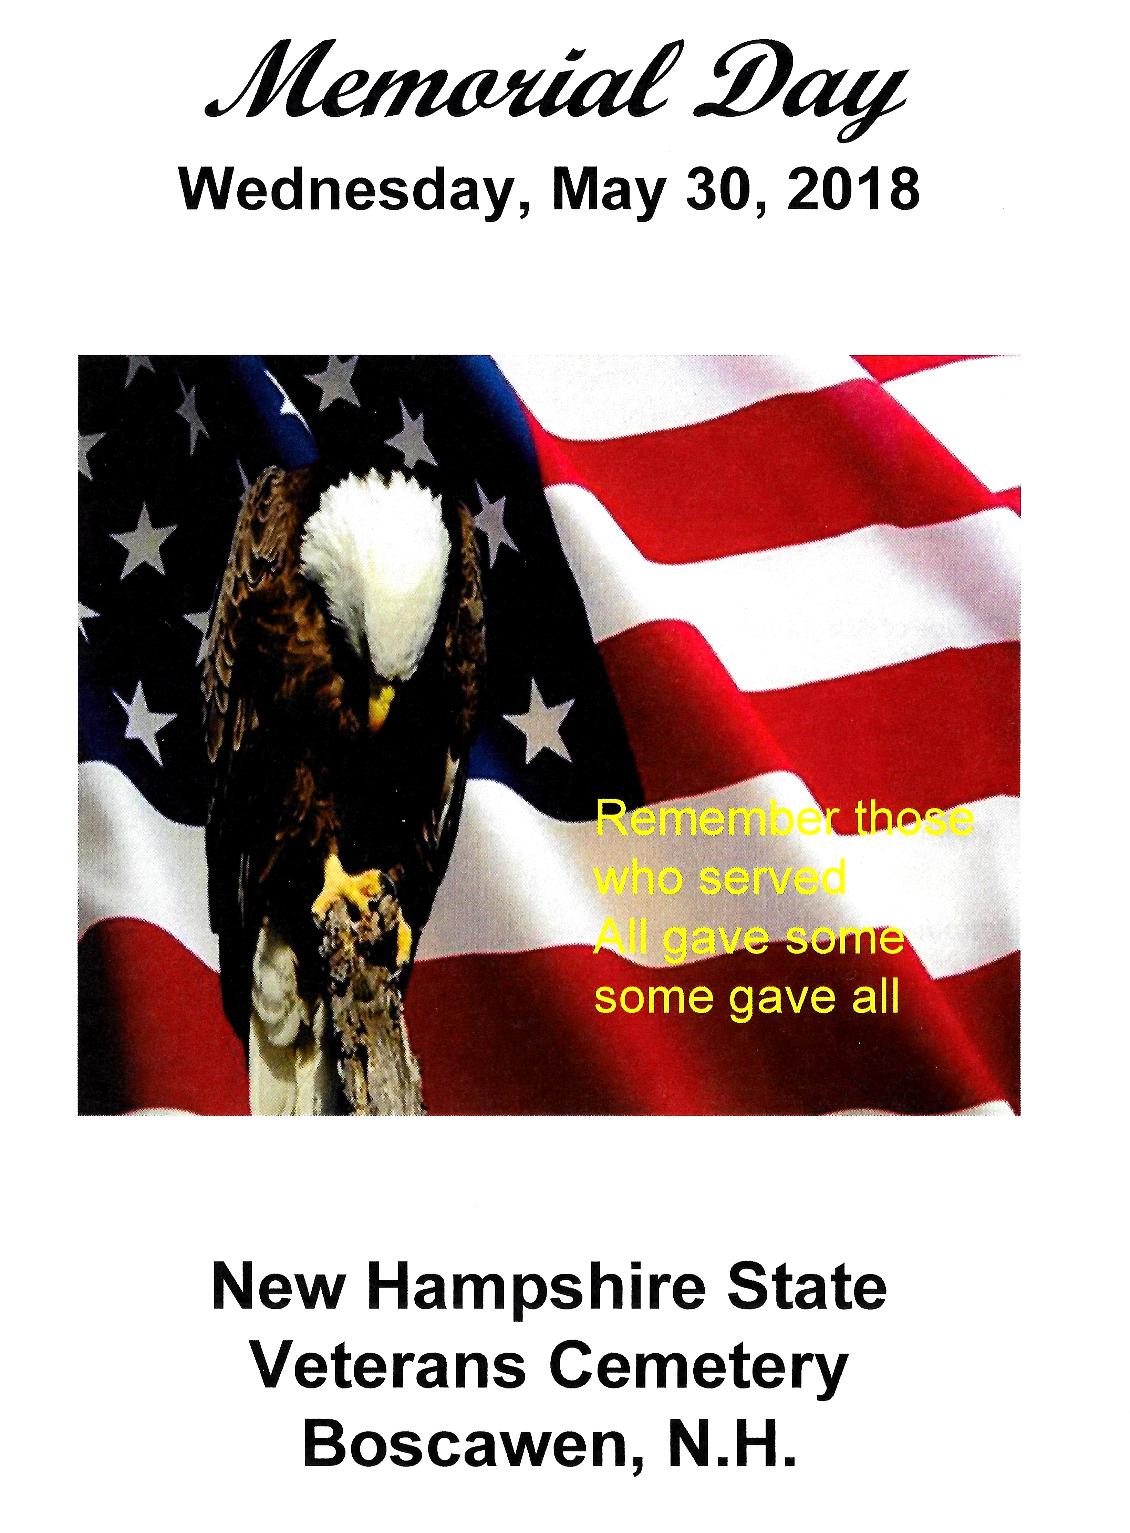 Memorial Day Program at the NH State Veterans Cemetery May 30 2018